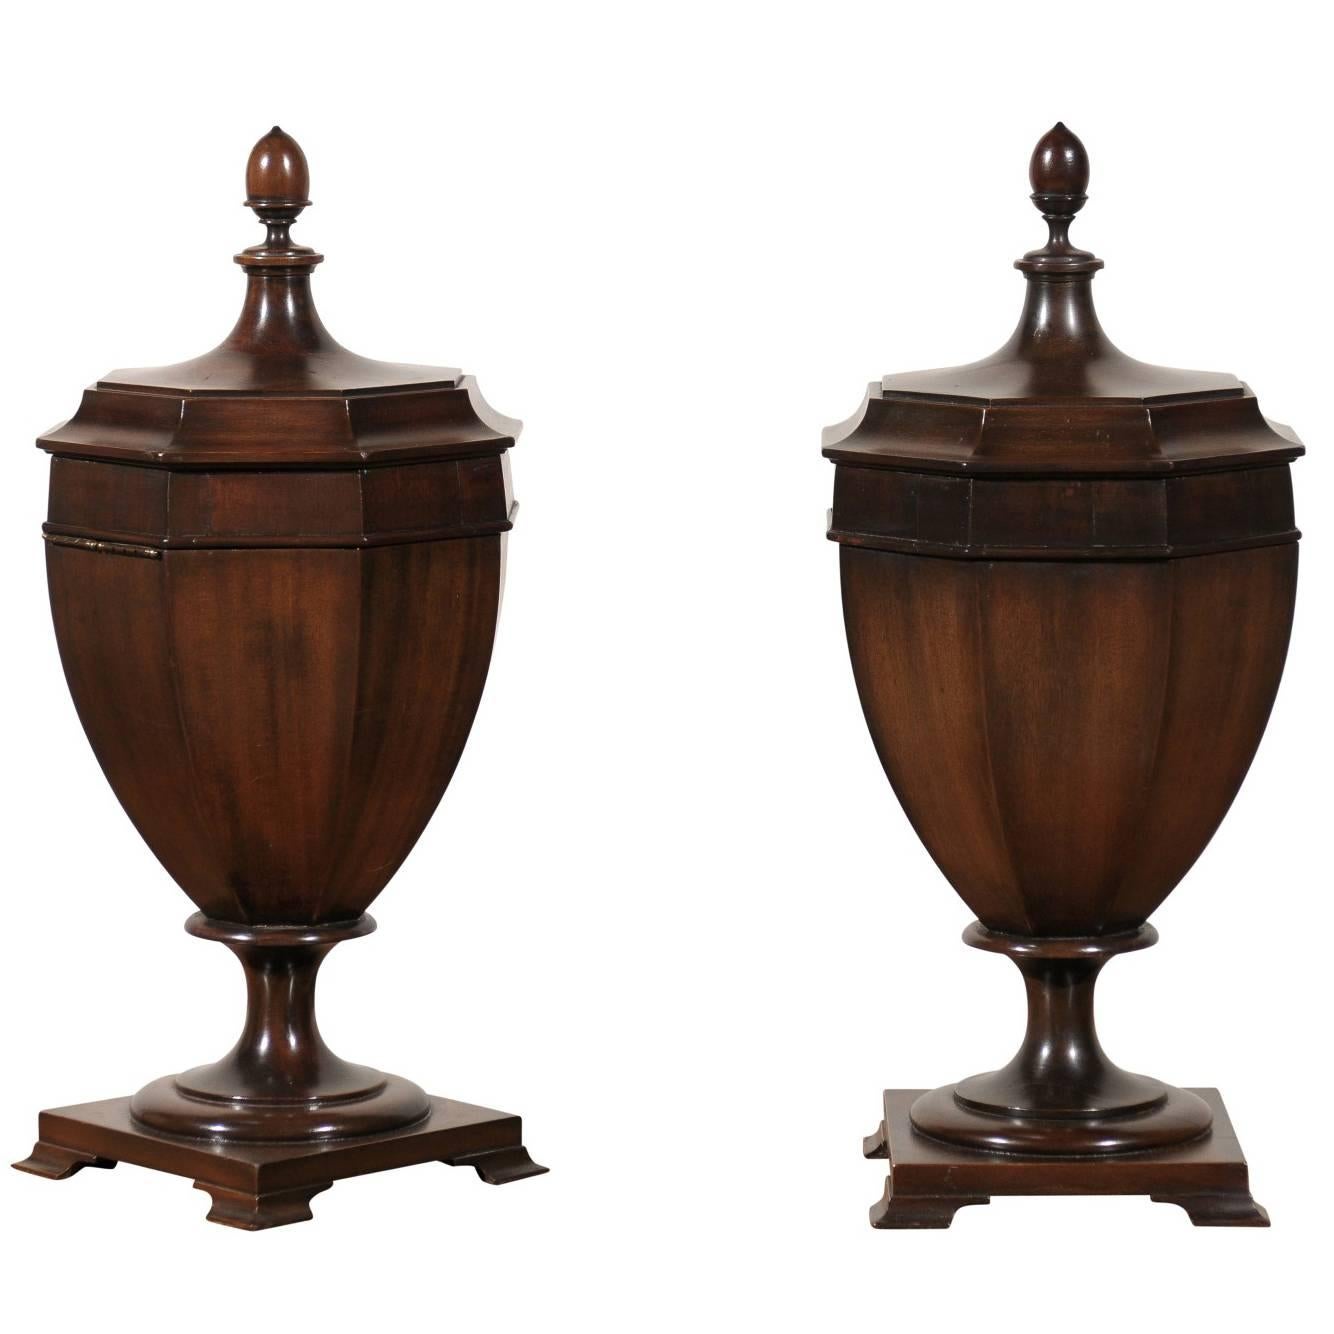 19th-20th Century Georgian Style Mahogany Knife Urns with Octagonal Lids